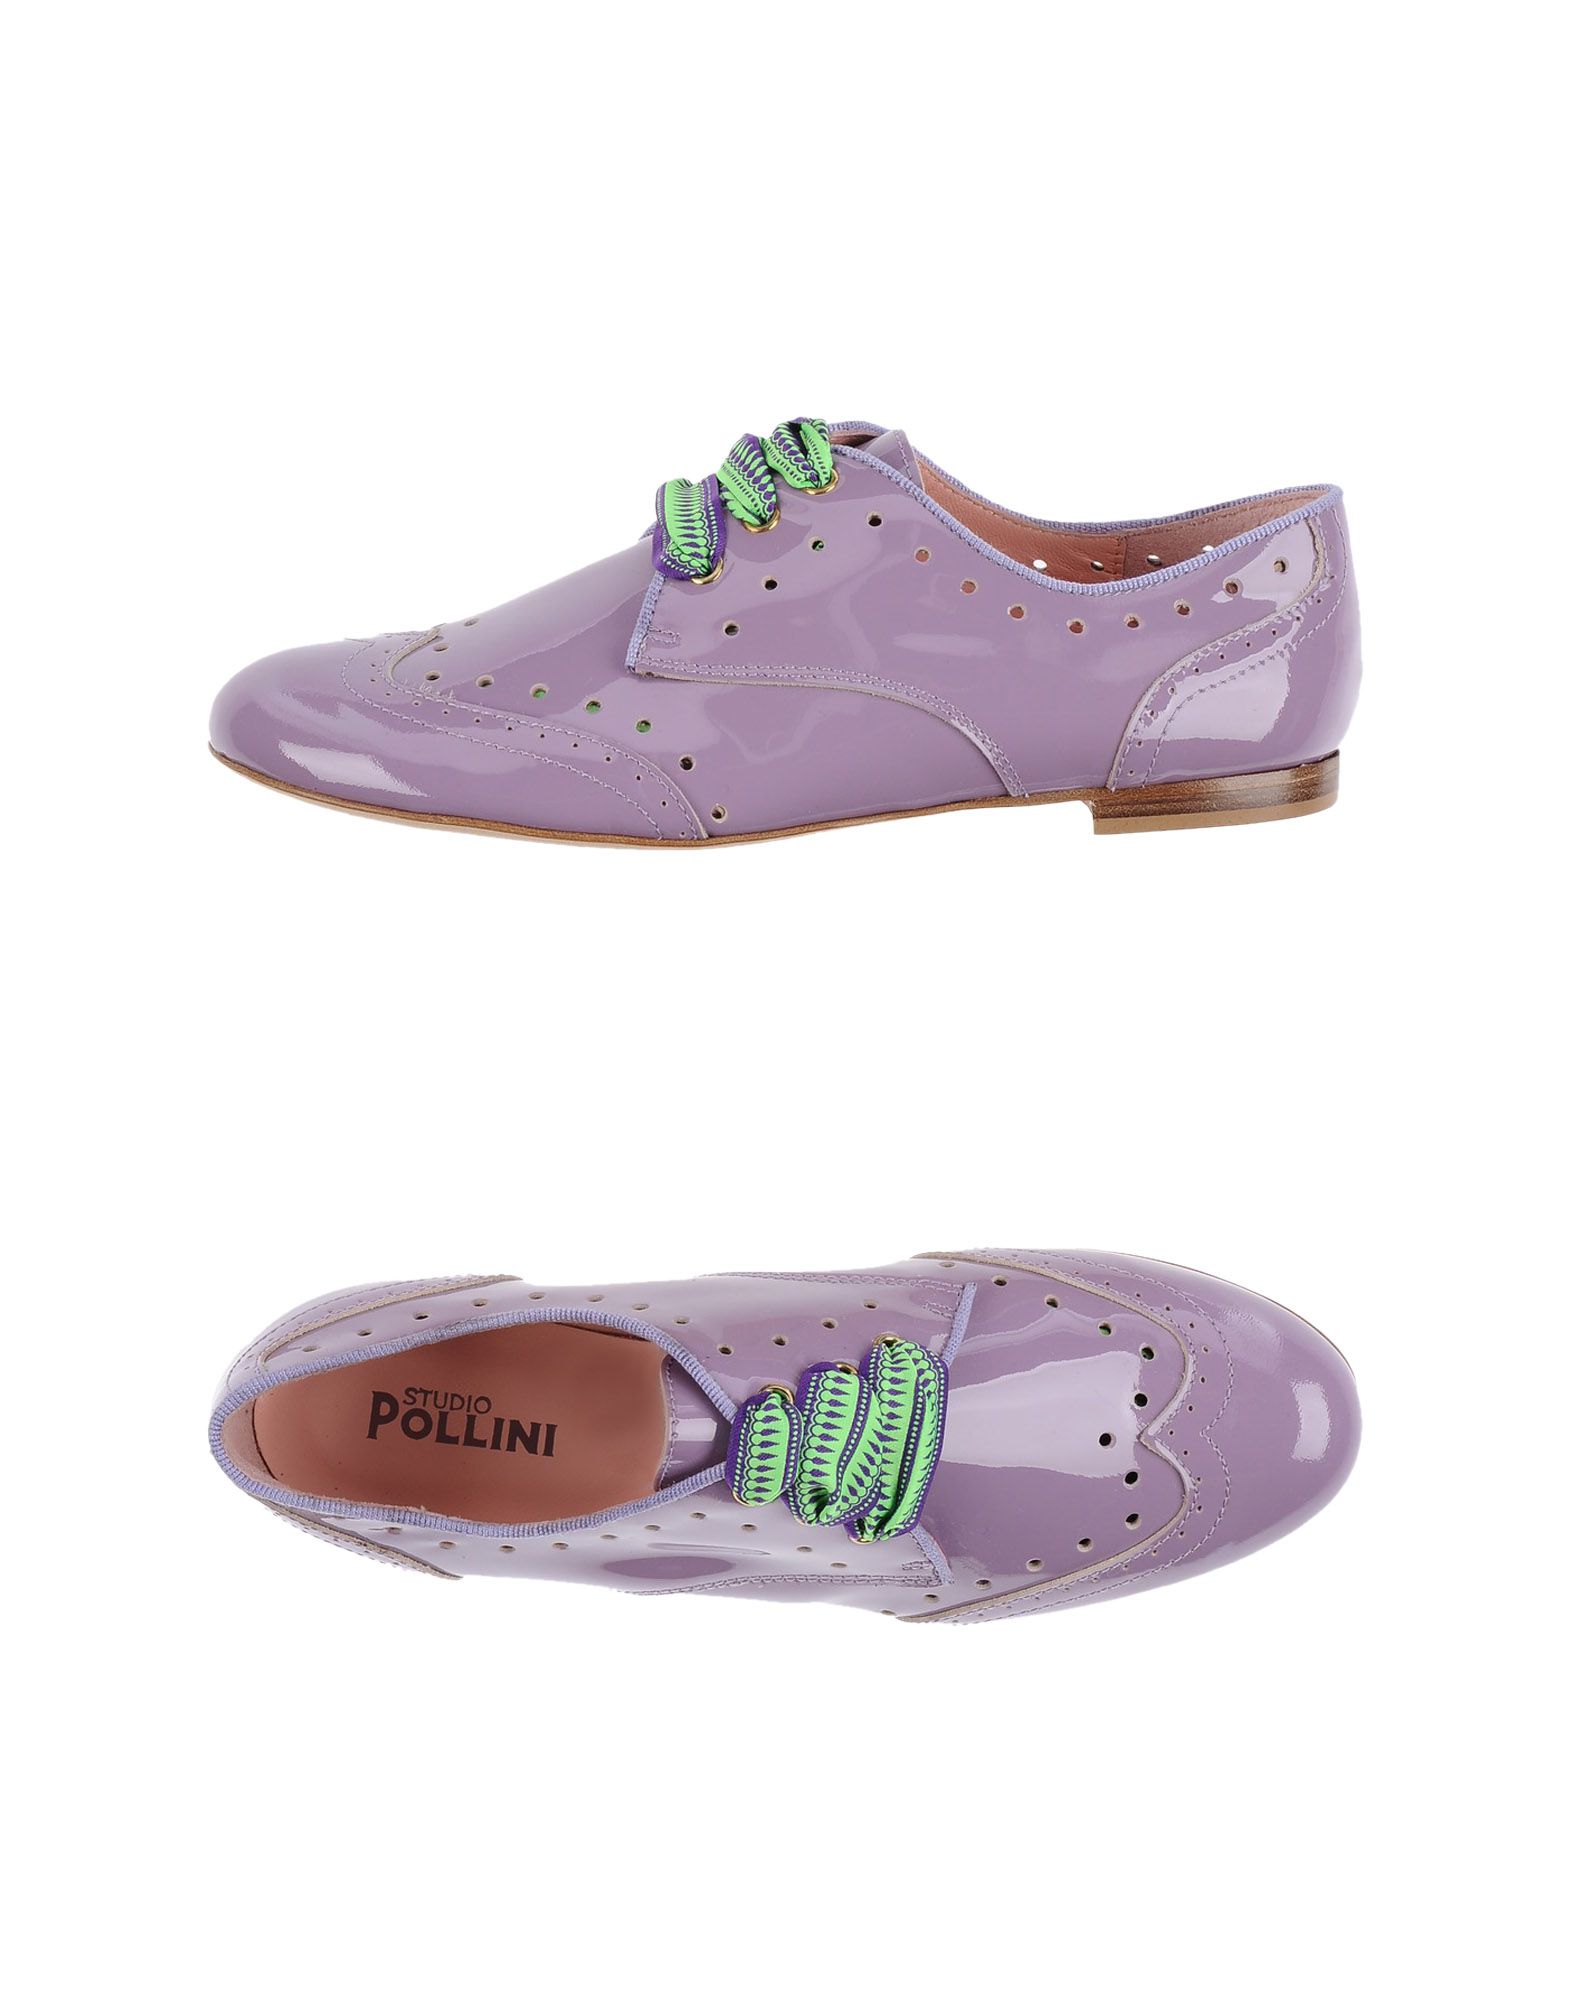 Studio Pollini Lace-up Shoes In Lilac